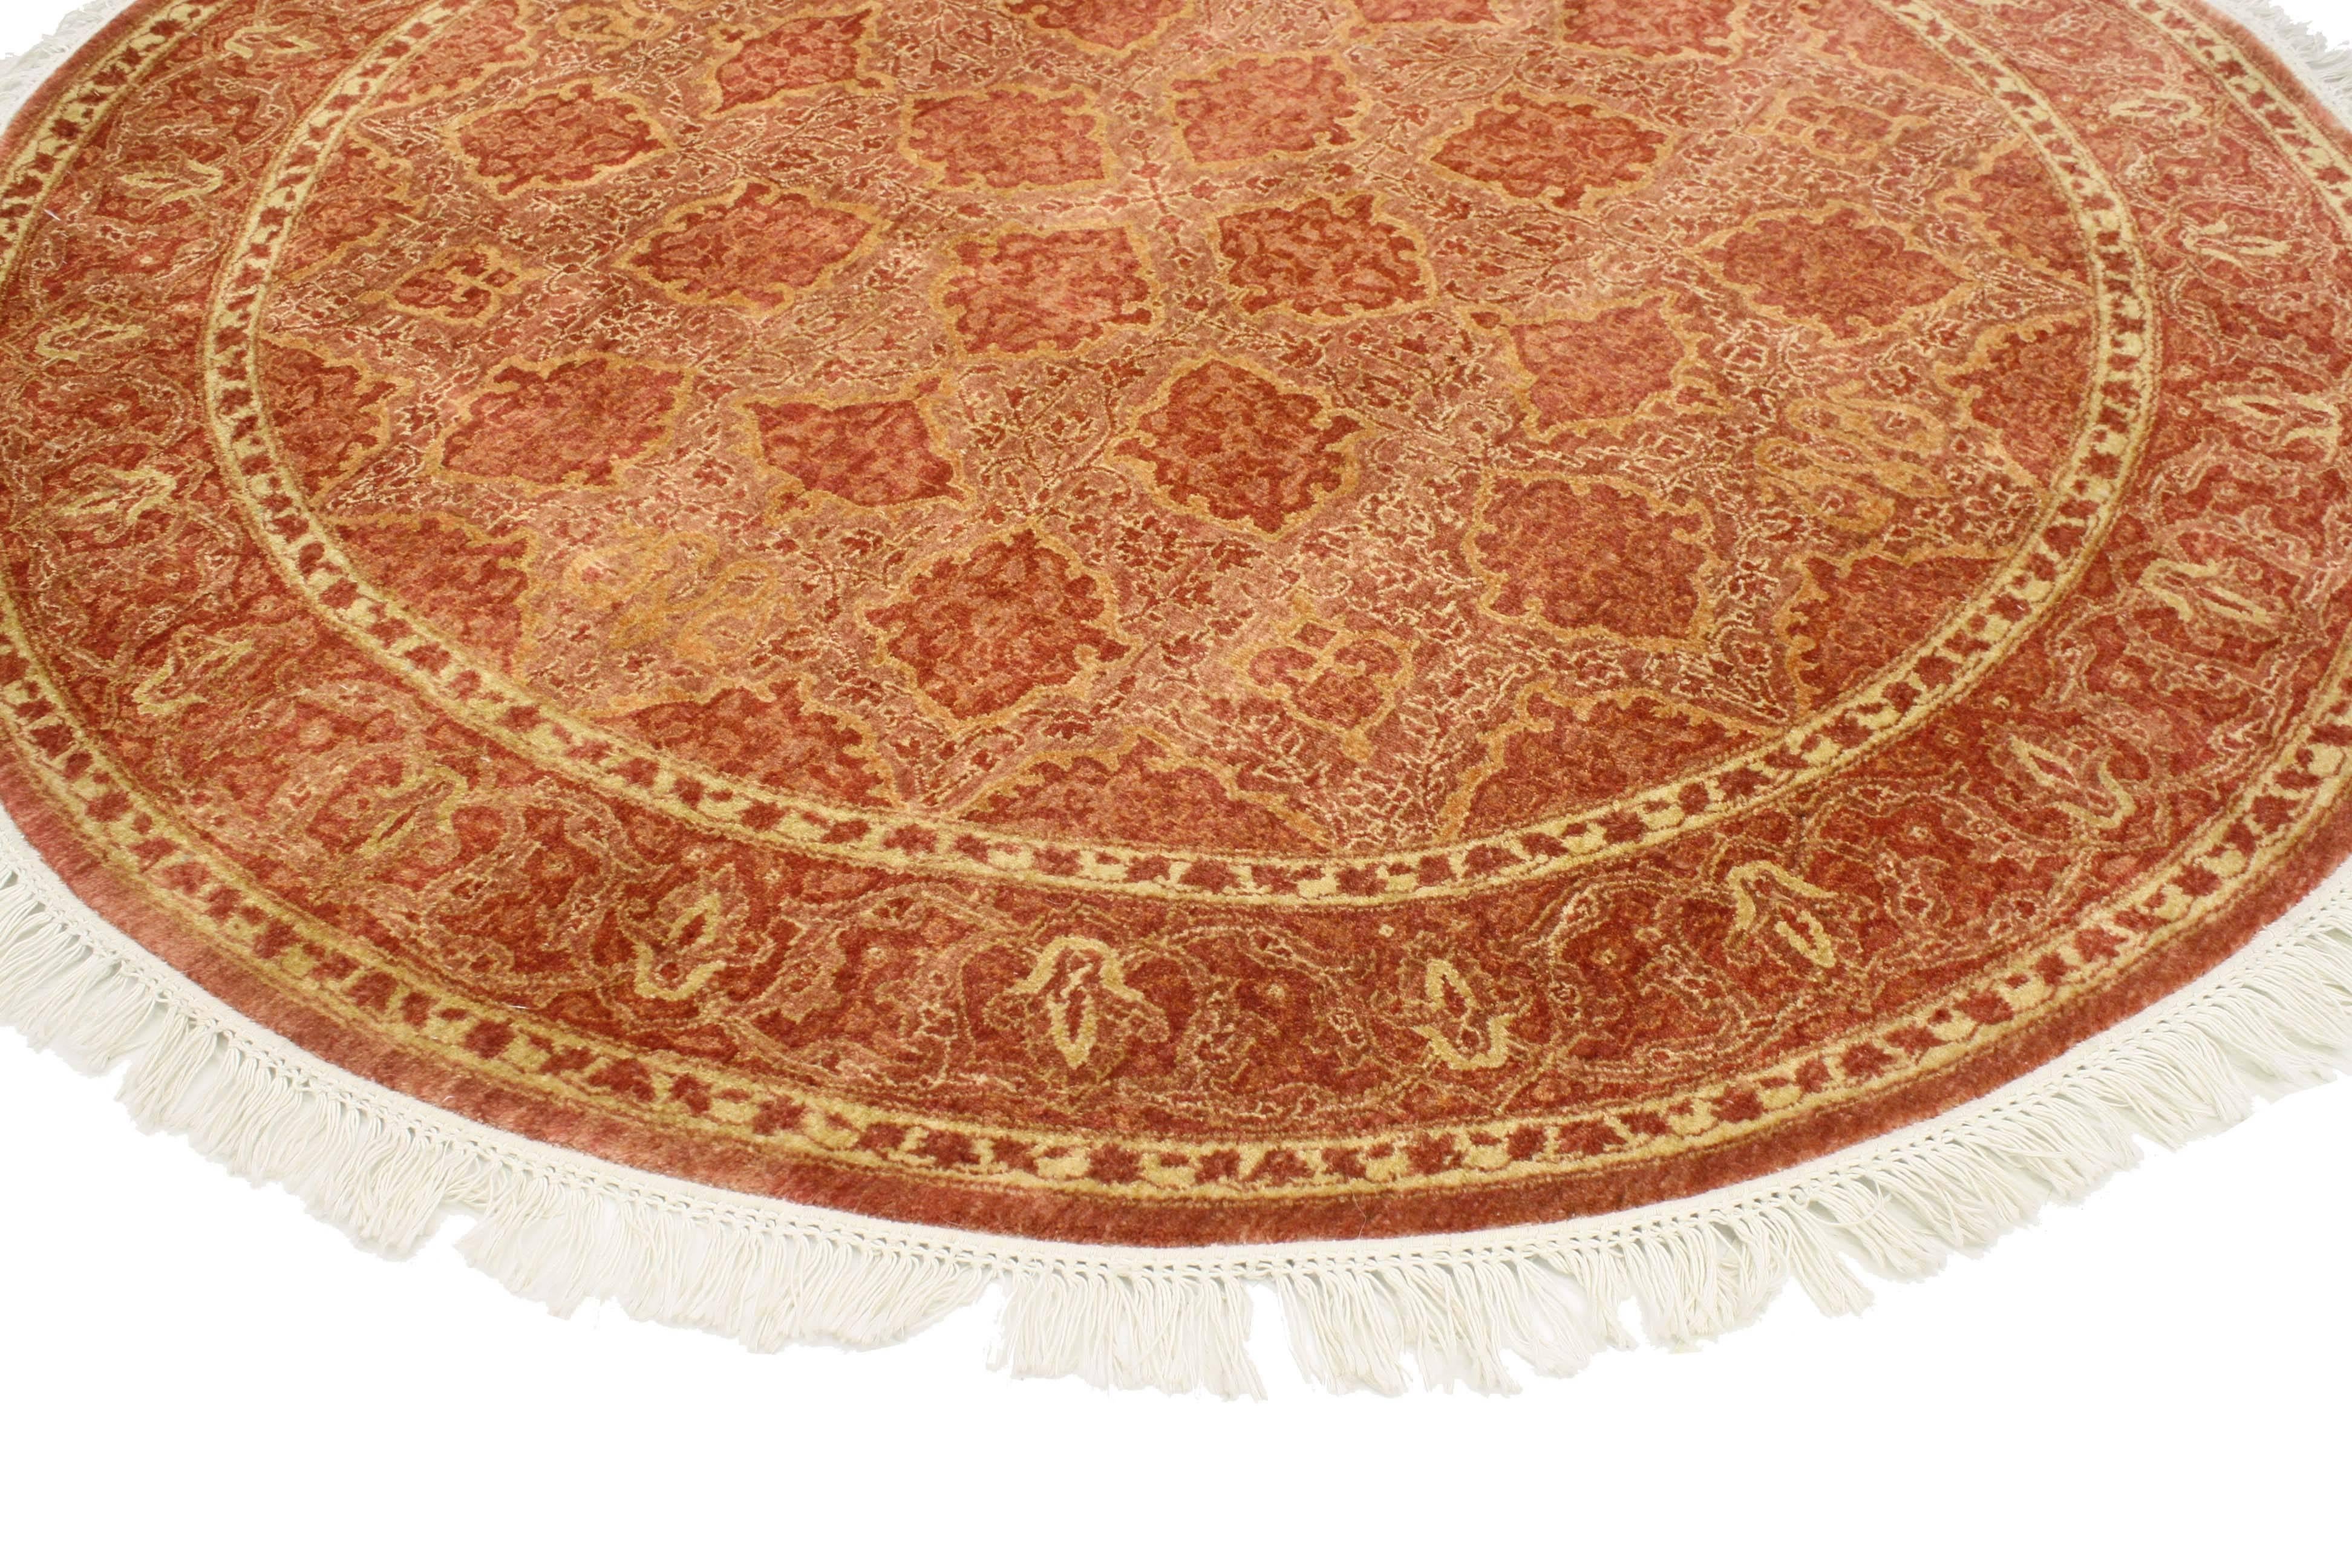 The warm spice tone colors combined with the eye-catching geometric pattern of this modern Indian round rug with transitional style make a major statement without visually overwhelming the rest of the room. The rich hues of Indian spices makes it